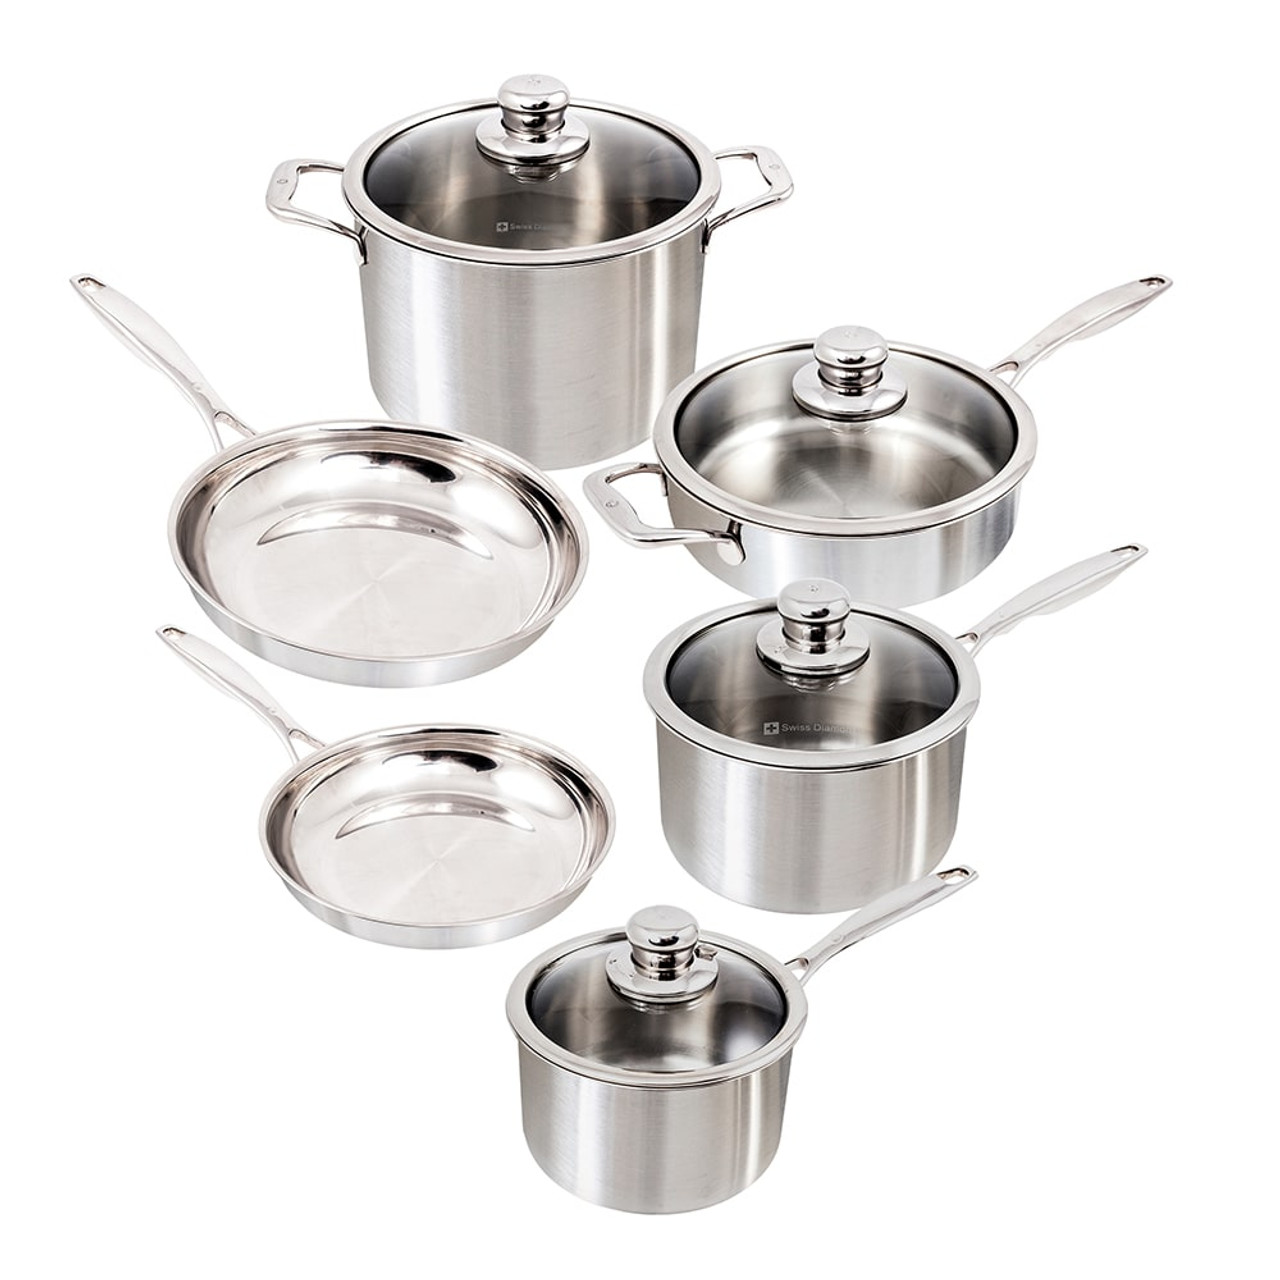 https://cdn11.bigcommerce.com/s-hccytny0od/images/stencil/1280x1280/products/3900/14195/swiss-diamond-premium-clad-stainless-10pc-cookware-set__19134.1643729997.jpg?c=2?imbypass=on